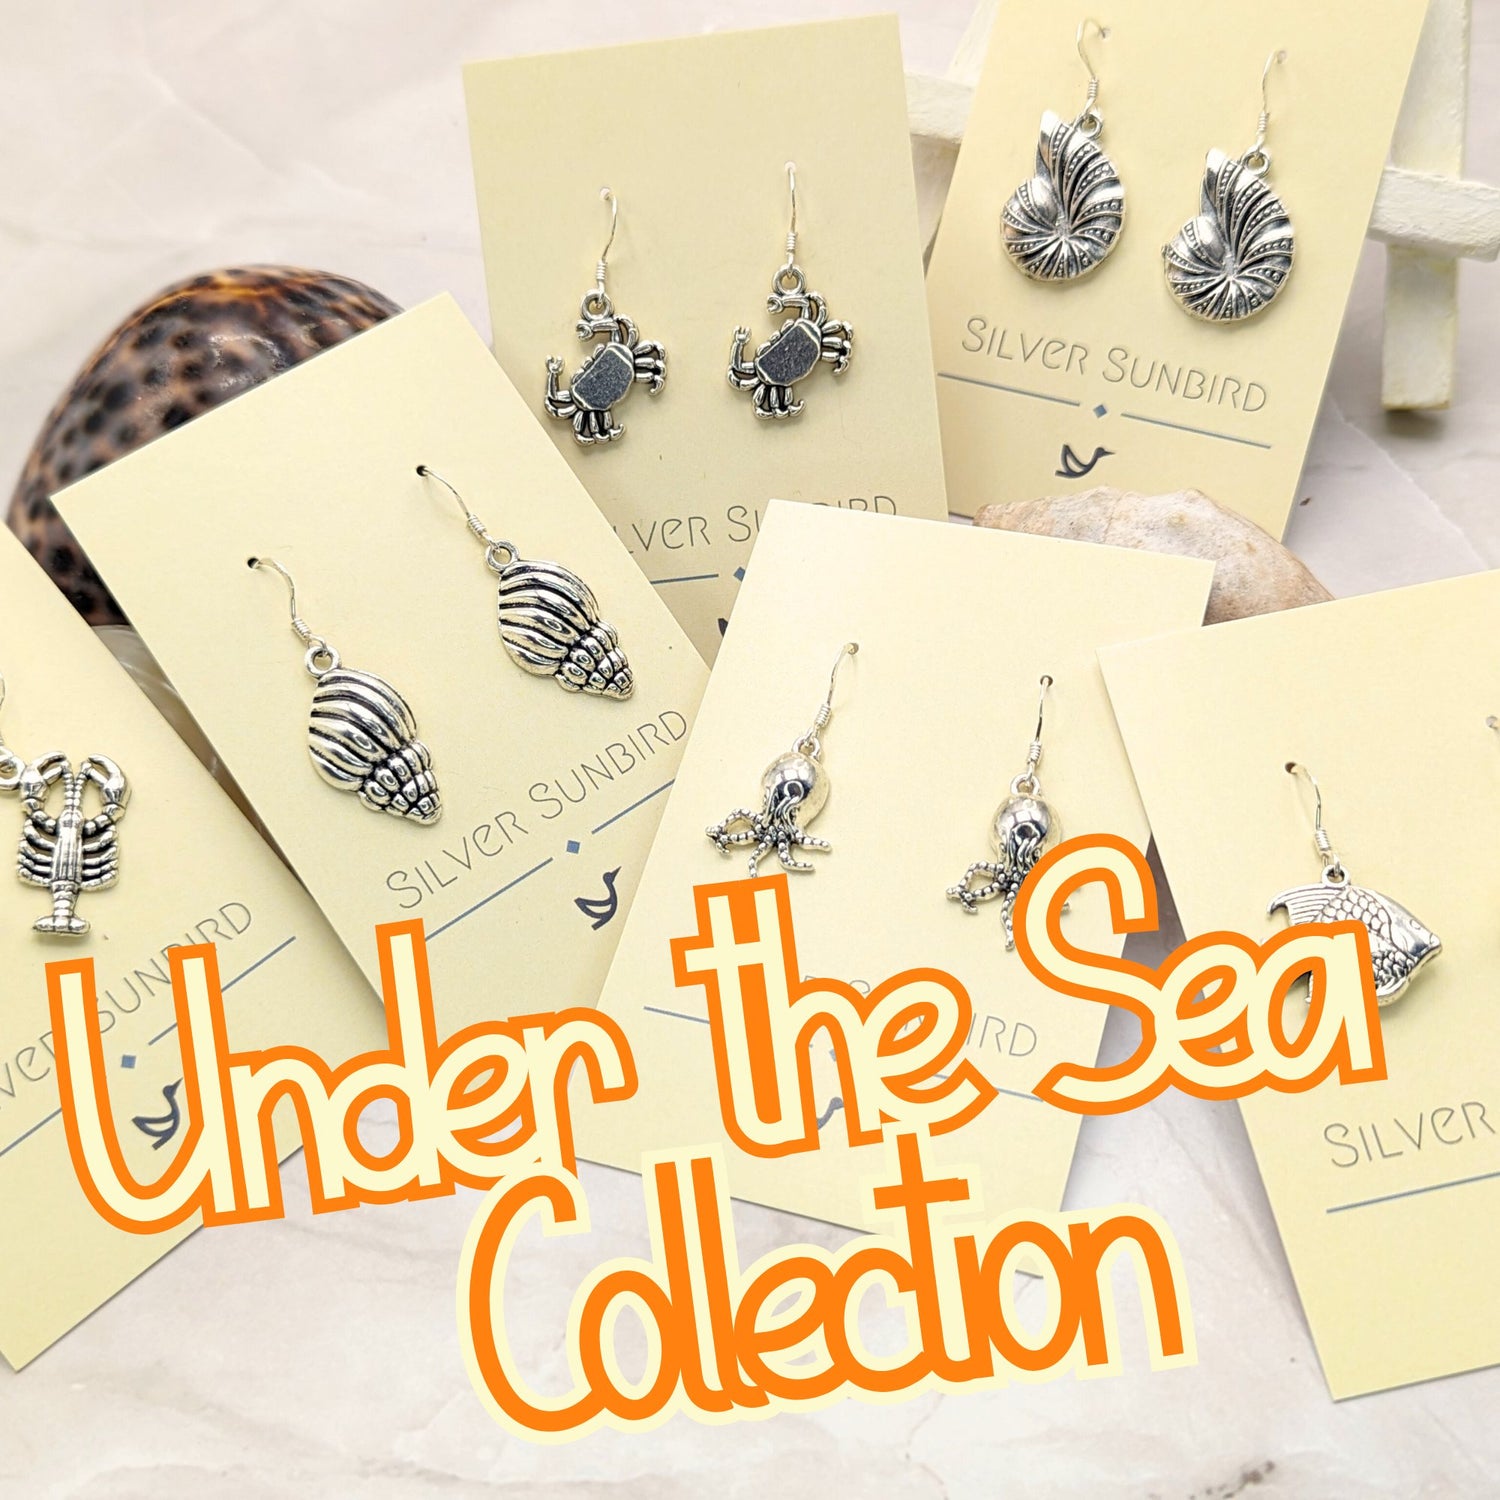 Under the sea earring collection including lobsters, crabs, octopus and more.